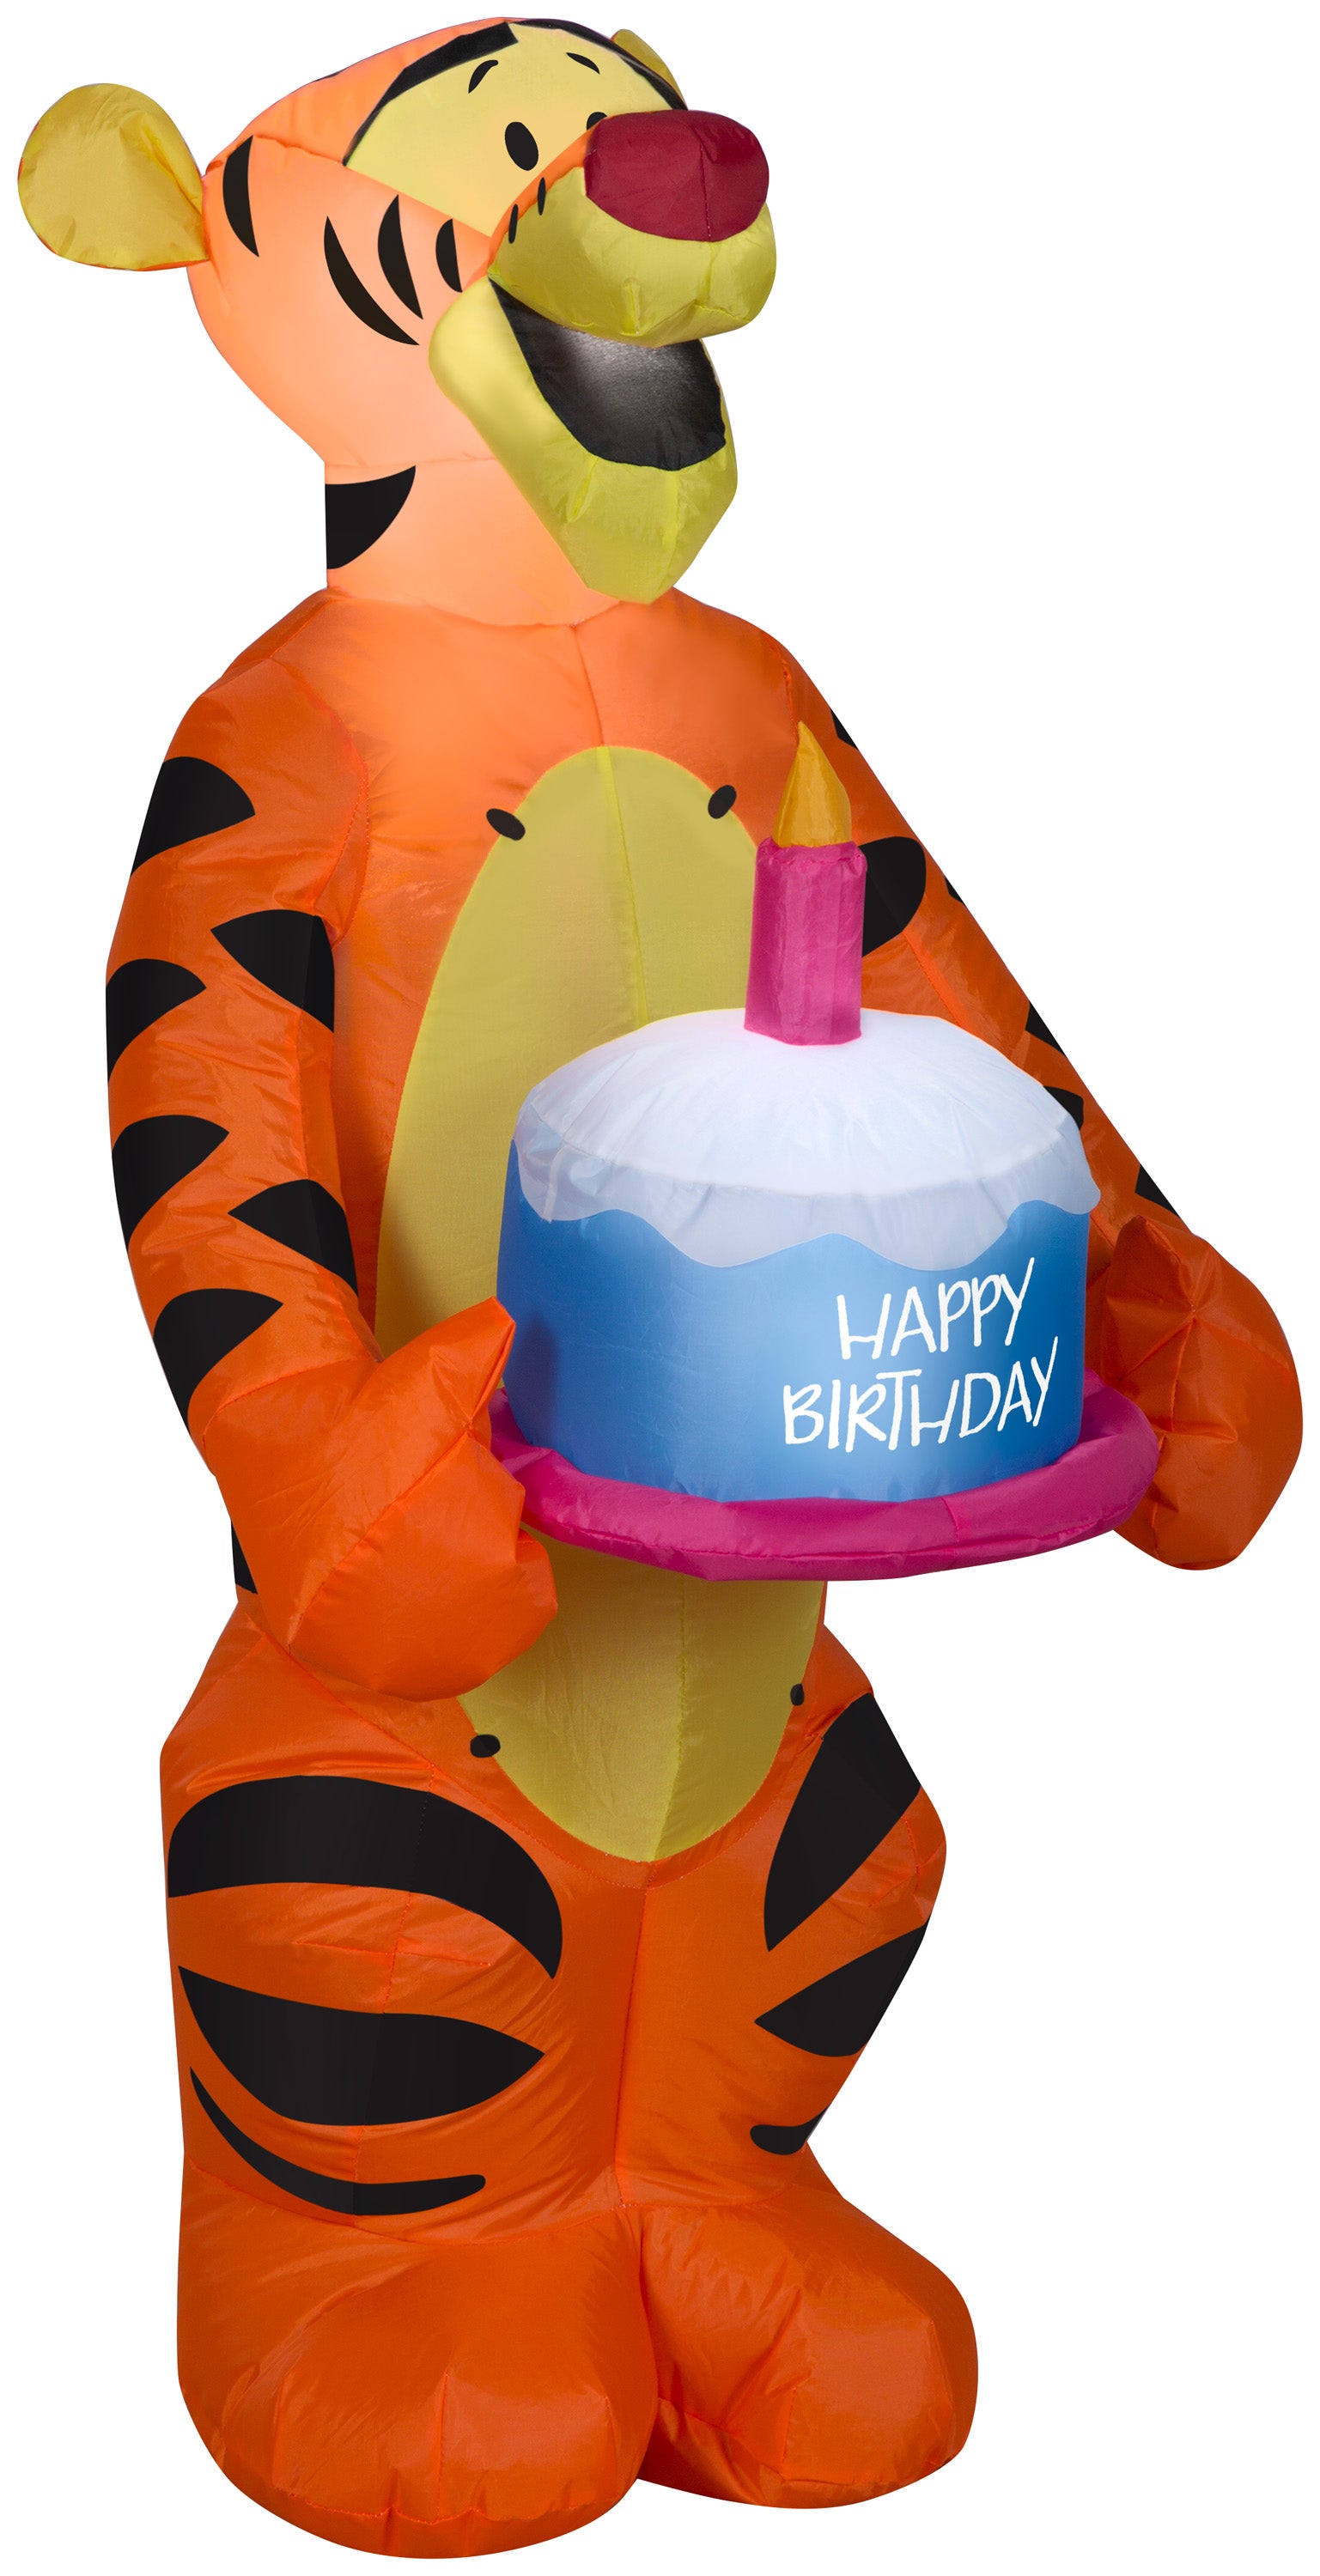 Gemmy Airblown Inflatable Birthday Party Tigger with Cake, 3.5 ft Tall